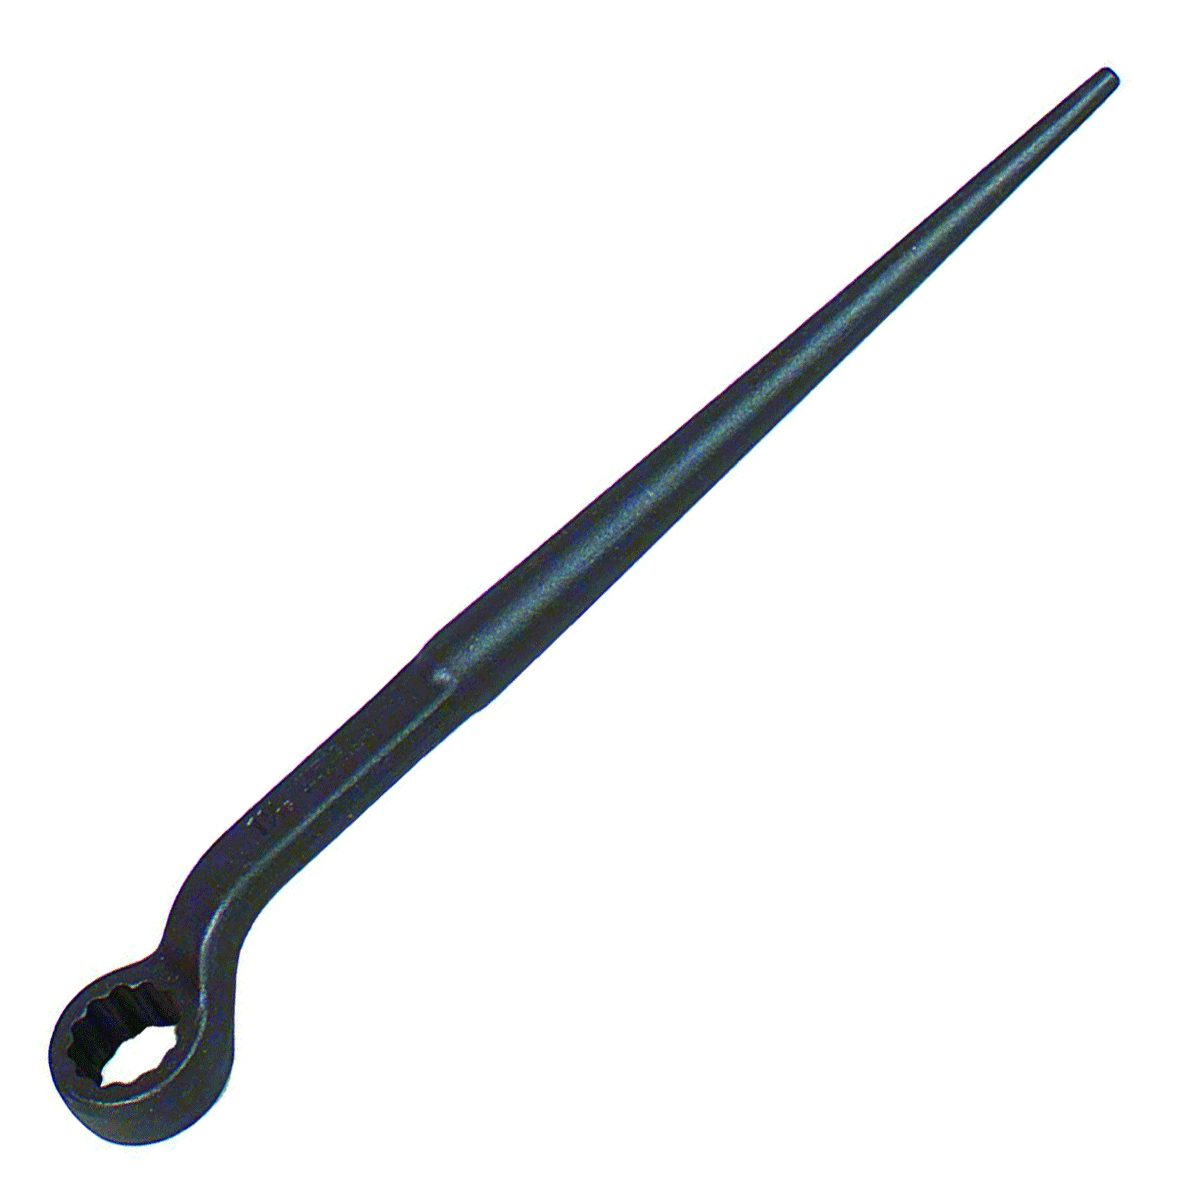 Wright 1-7/8" Spud Handle Box Wrench 12 Pt. #1790 (1790WR)